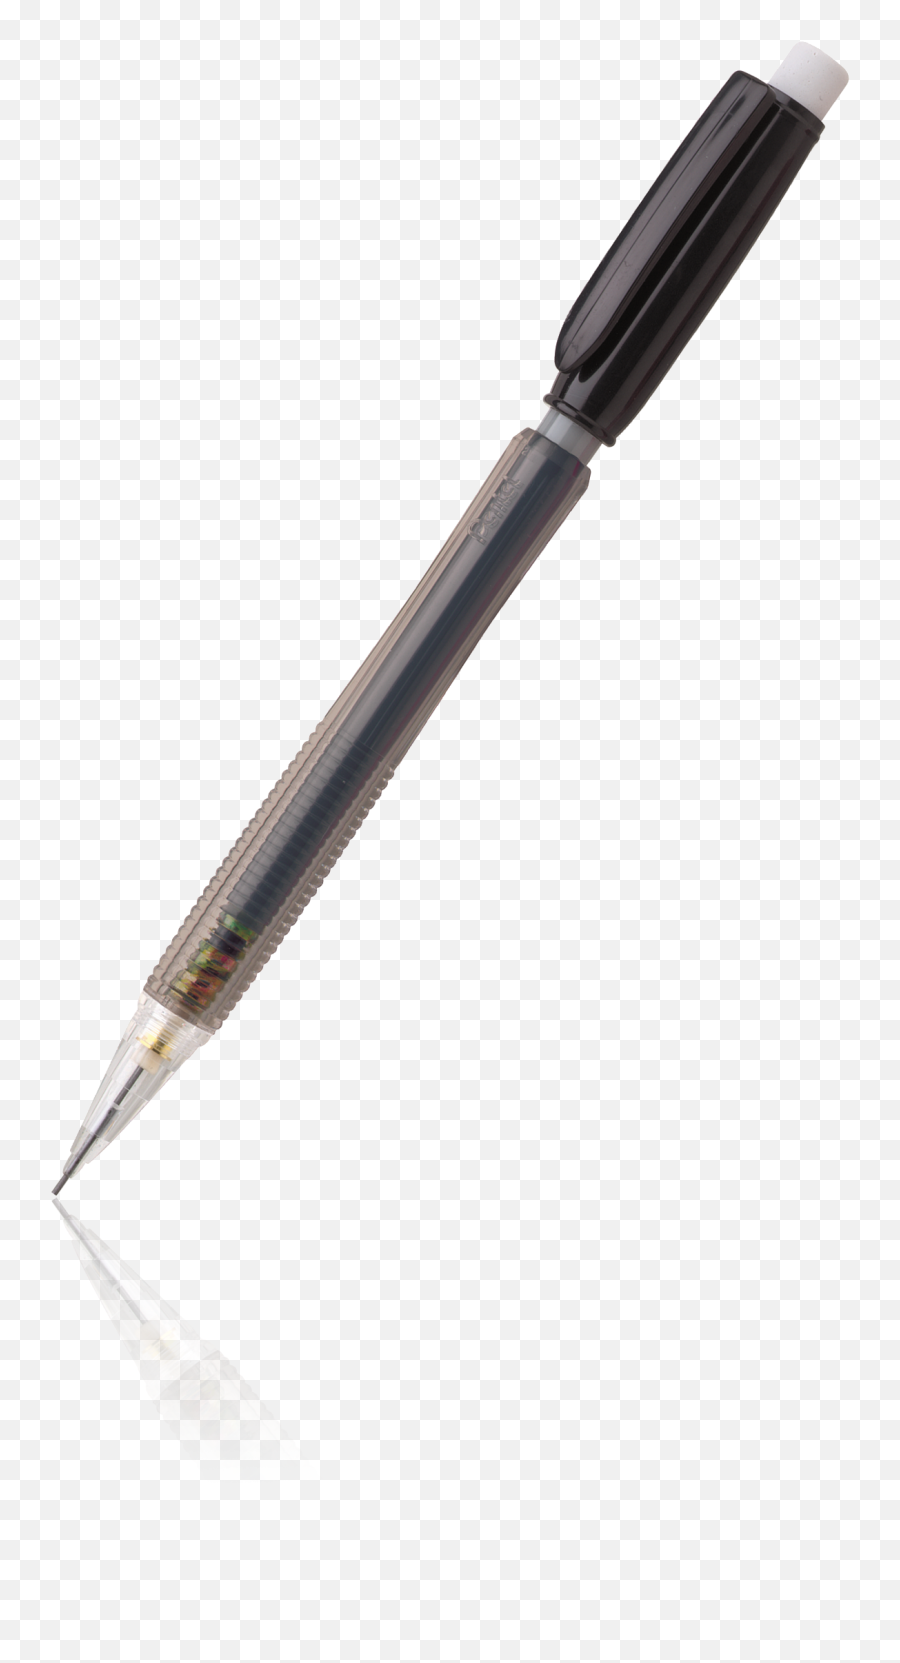 Png Image With Transparent Background - Transparent Background Pen Png,Pen Transparent